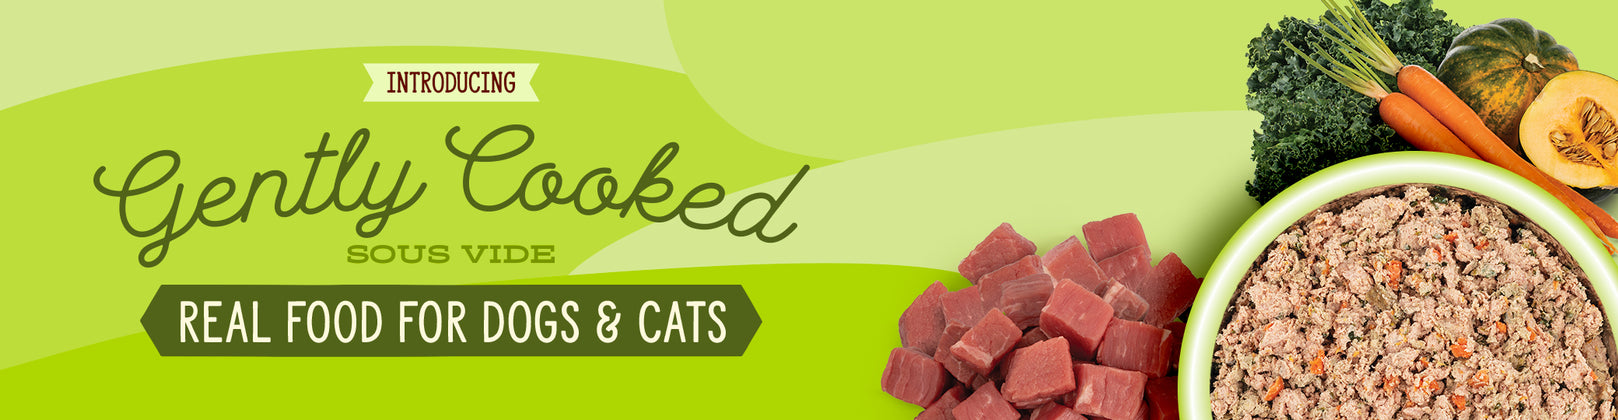 NEW Gently Cooked Recipes for Dogs & Cats